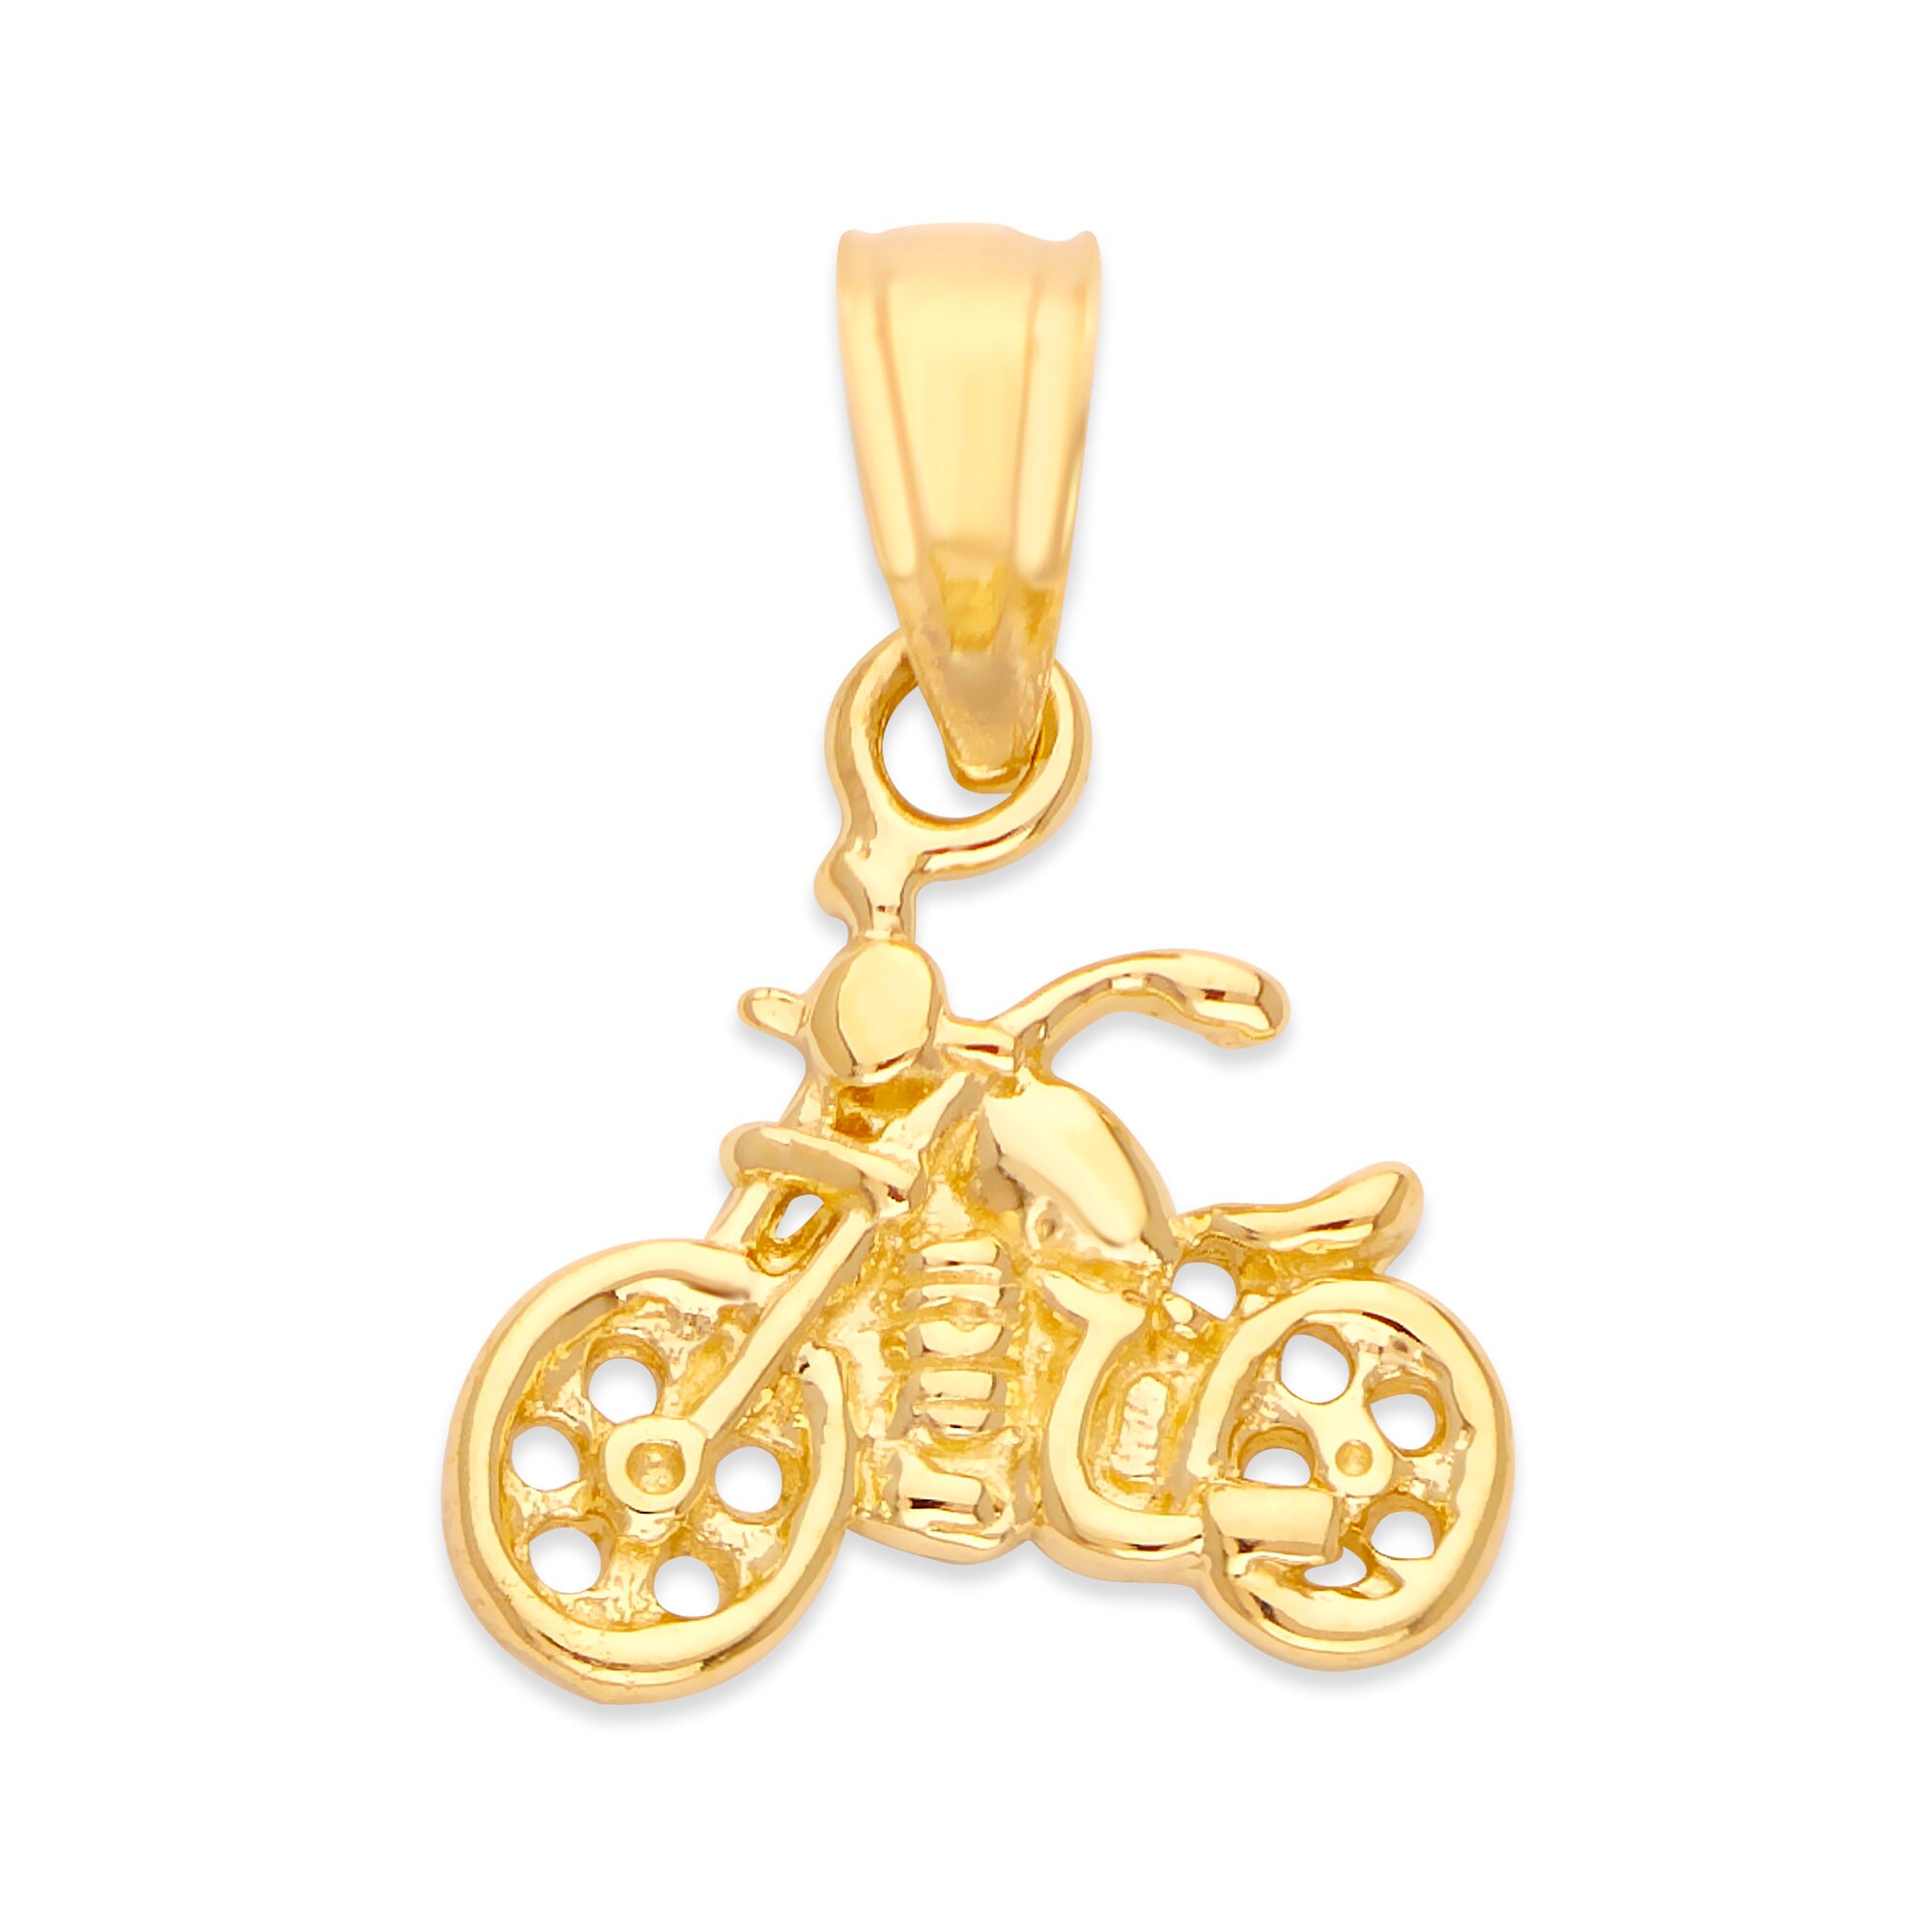 Stylish Handcrafted Gold Motorcycle Necklace Pendant 